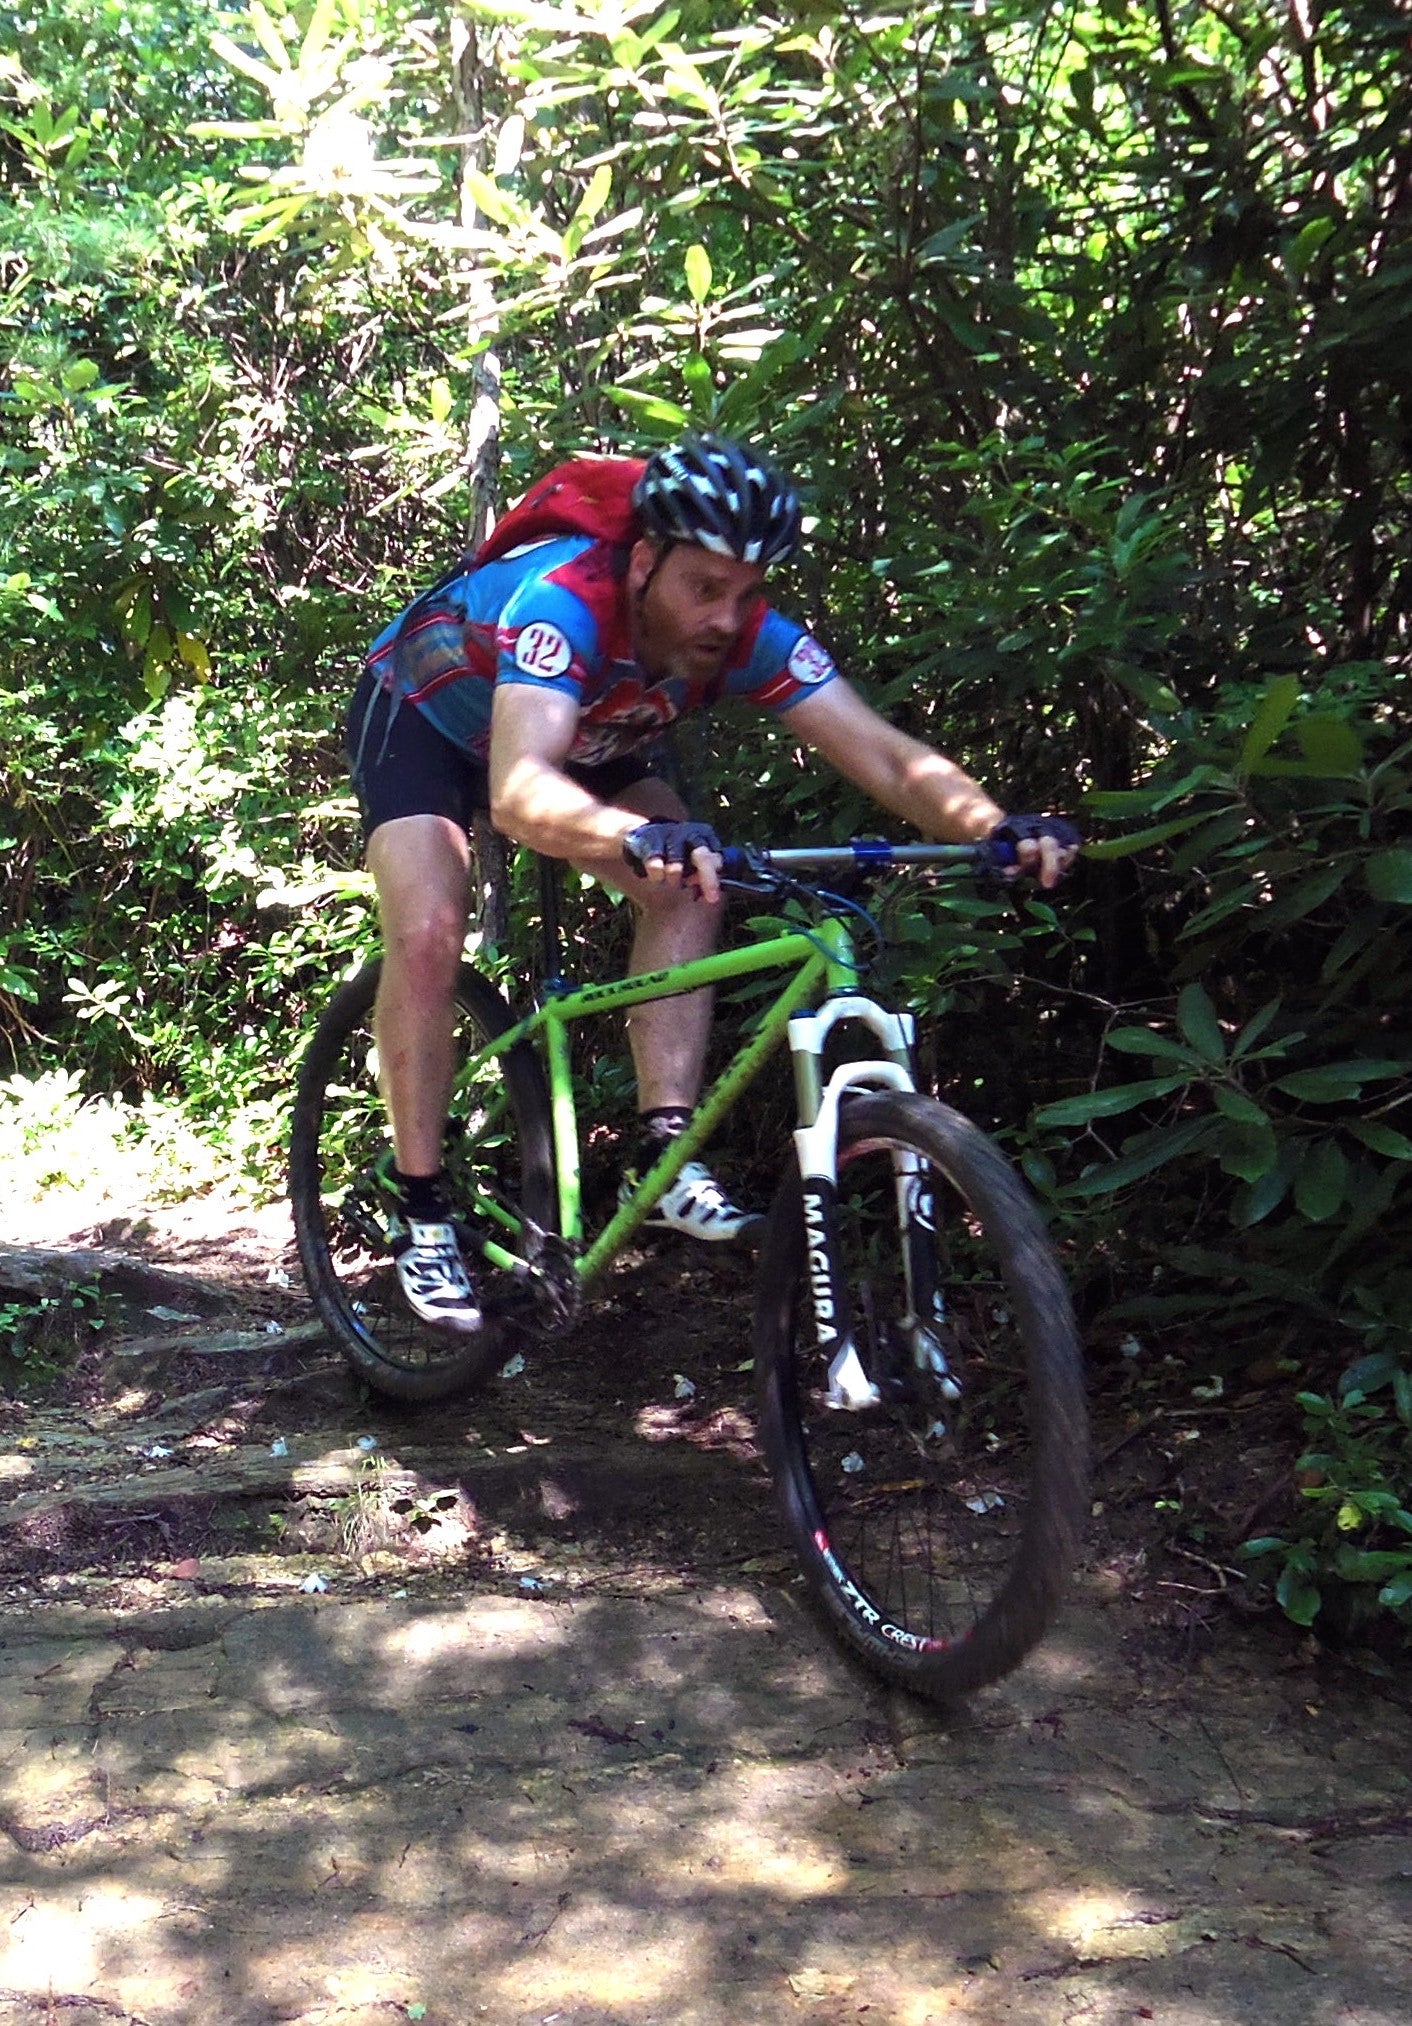 Owner Sean off-road cycling in Pisgah National Forest North Carolina